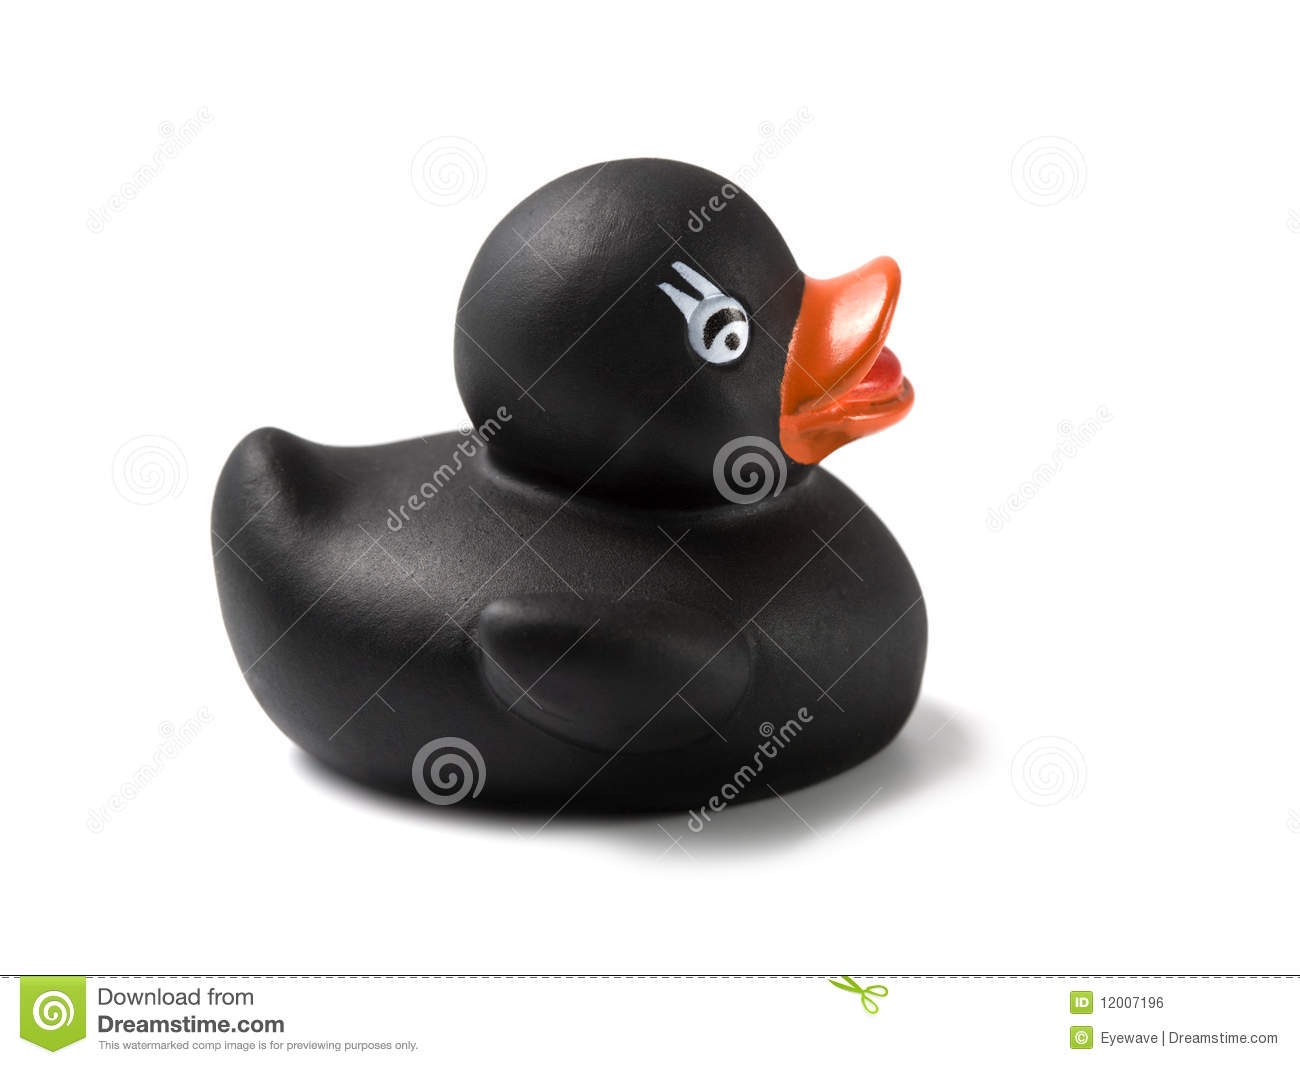 Black Rubber Ducky Royalty Free Stock Image   Image  12007196